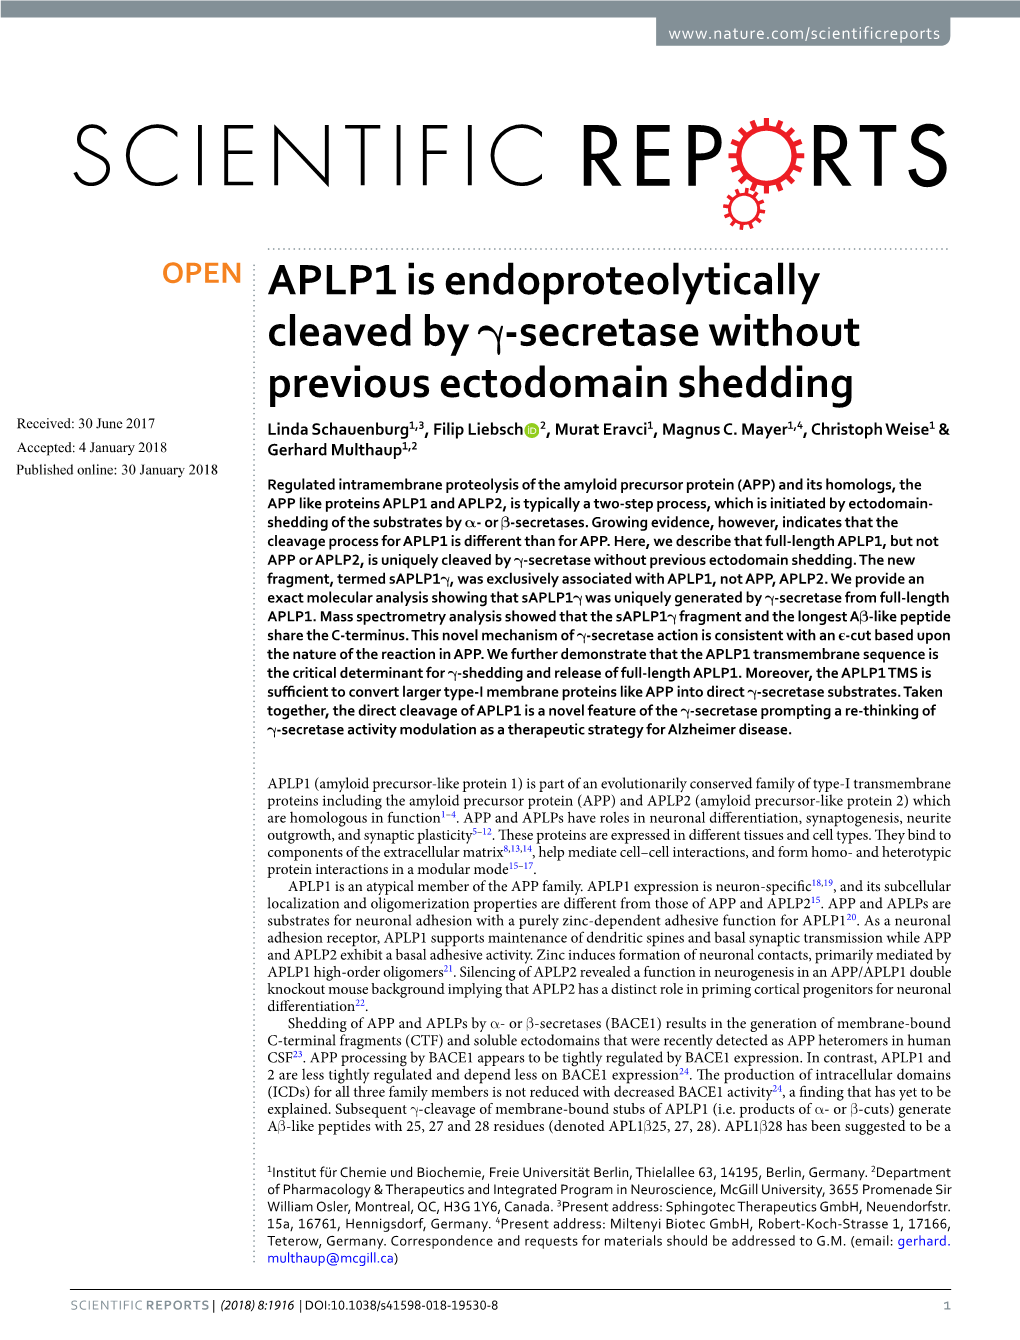 APLP1 Is Endoproteolytically Cleaved by Γ-Secretase Without Previous